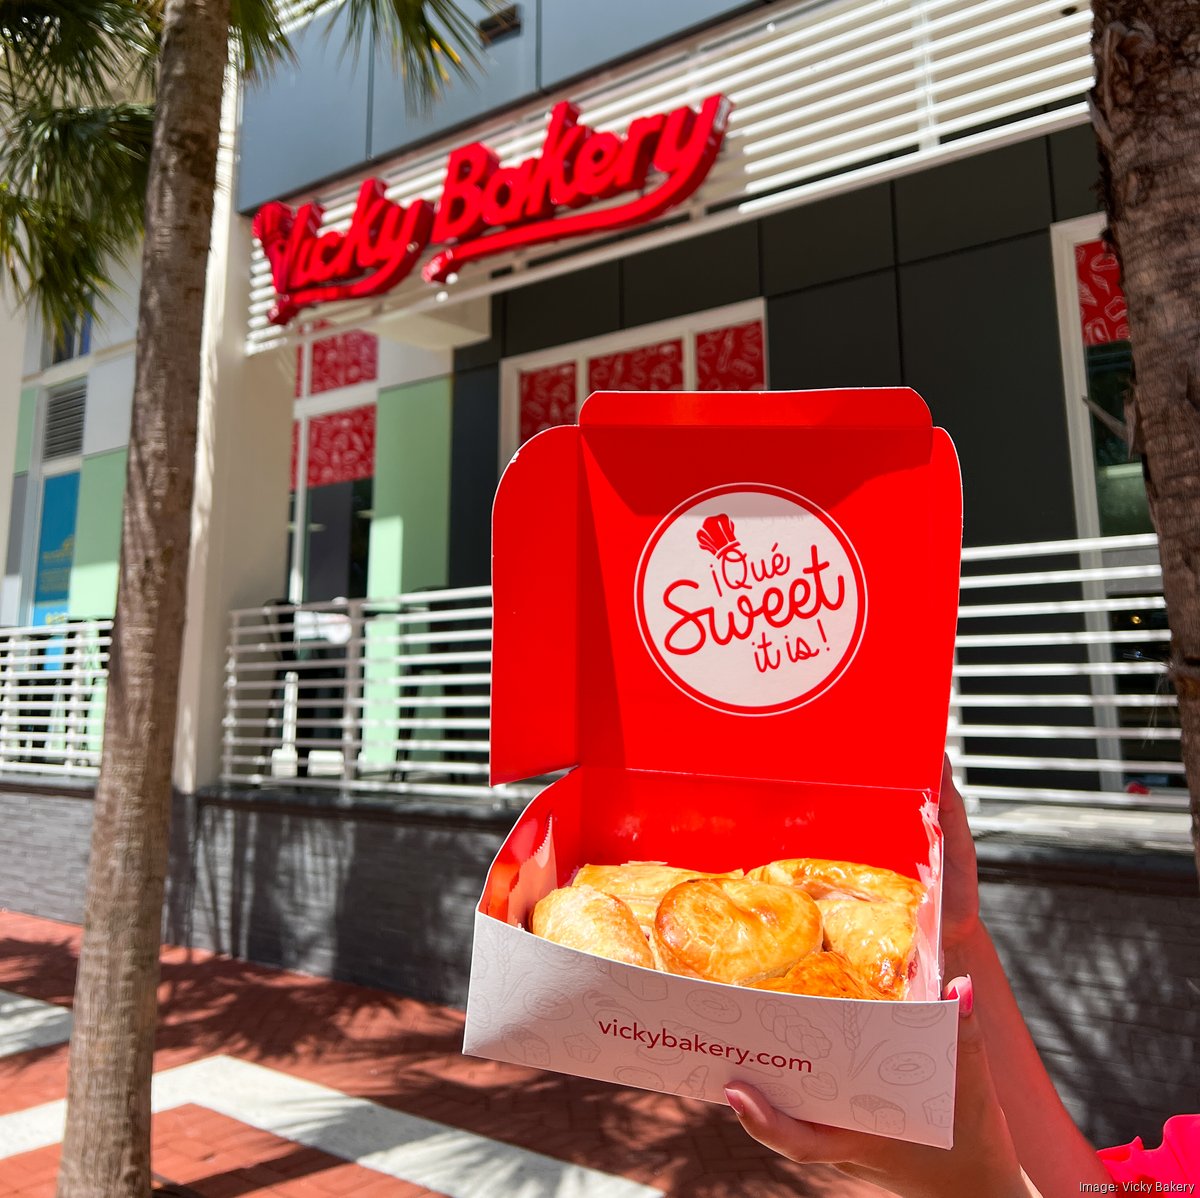 News in Brief: Vicky Bakery opens in Fort Lauderdale; Cozza Realty Group  expands to Miami - South Florida Business Journal